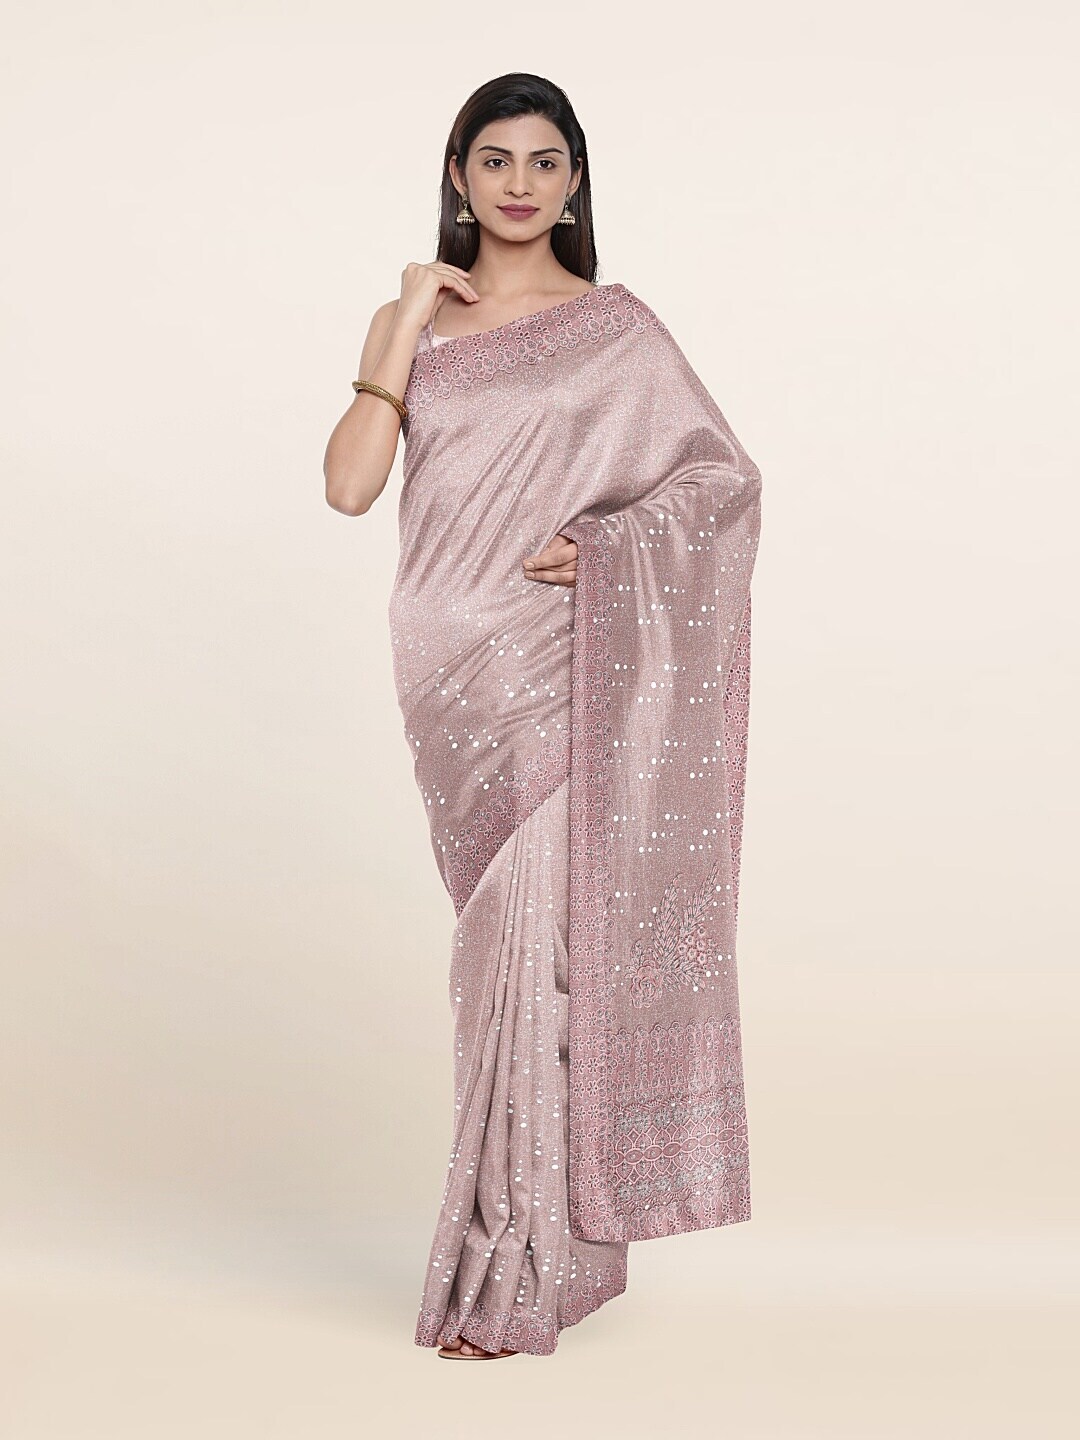 Pothys Peach-Coloured Embellished Beads and Stones Saree Price in India